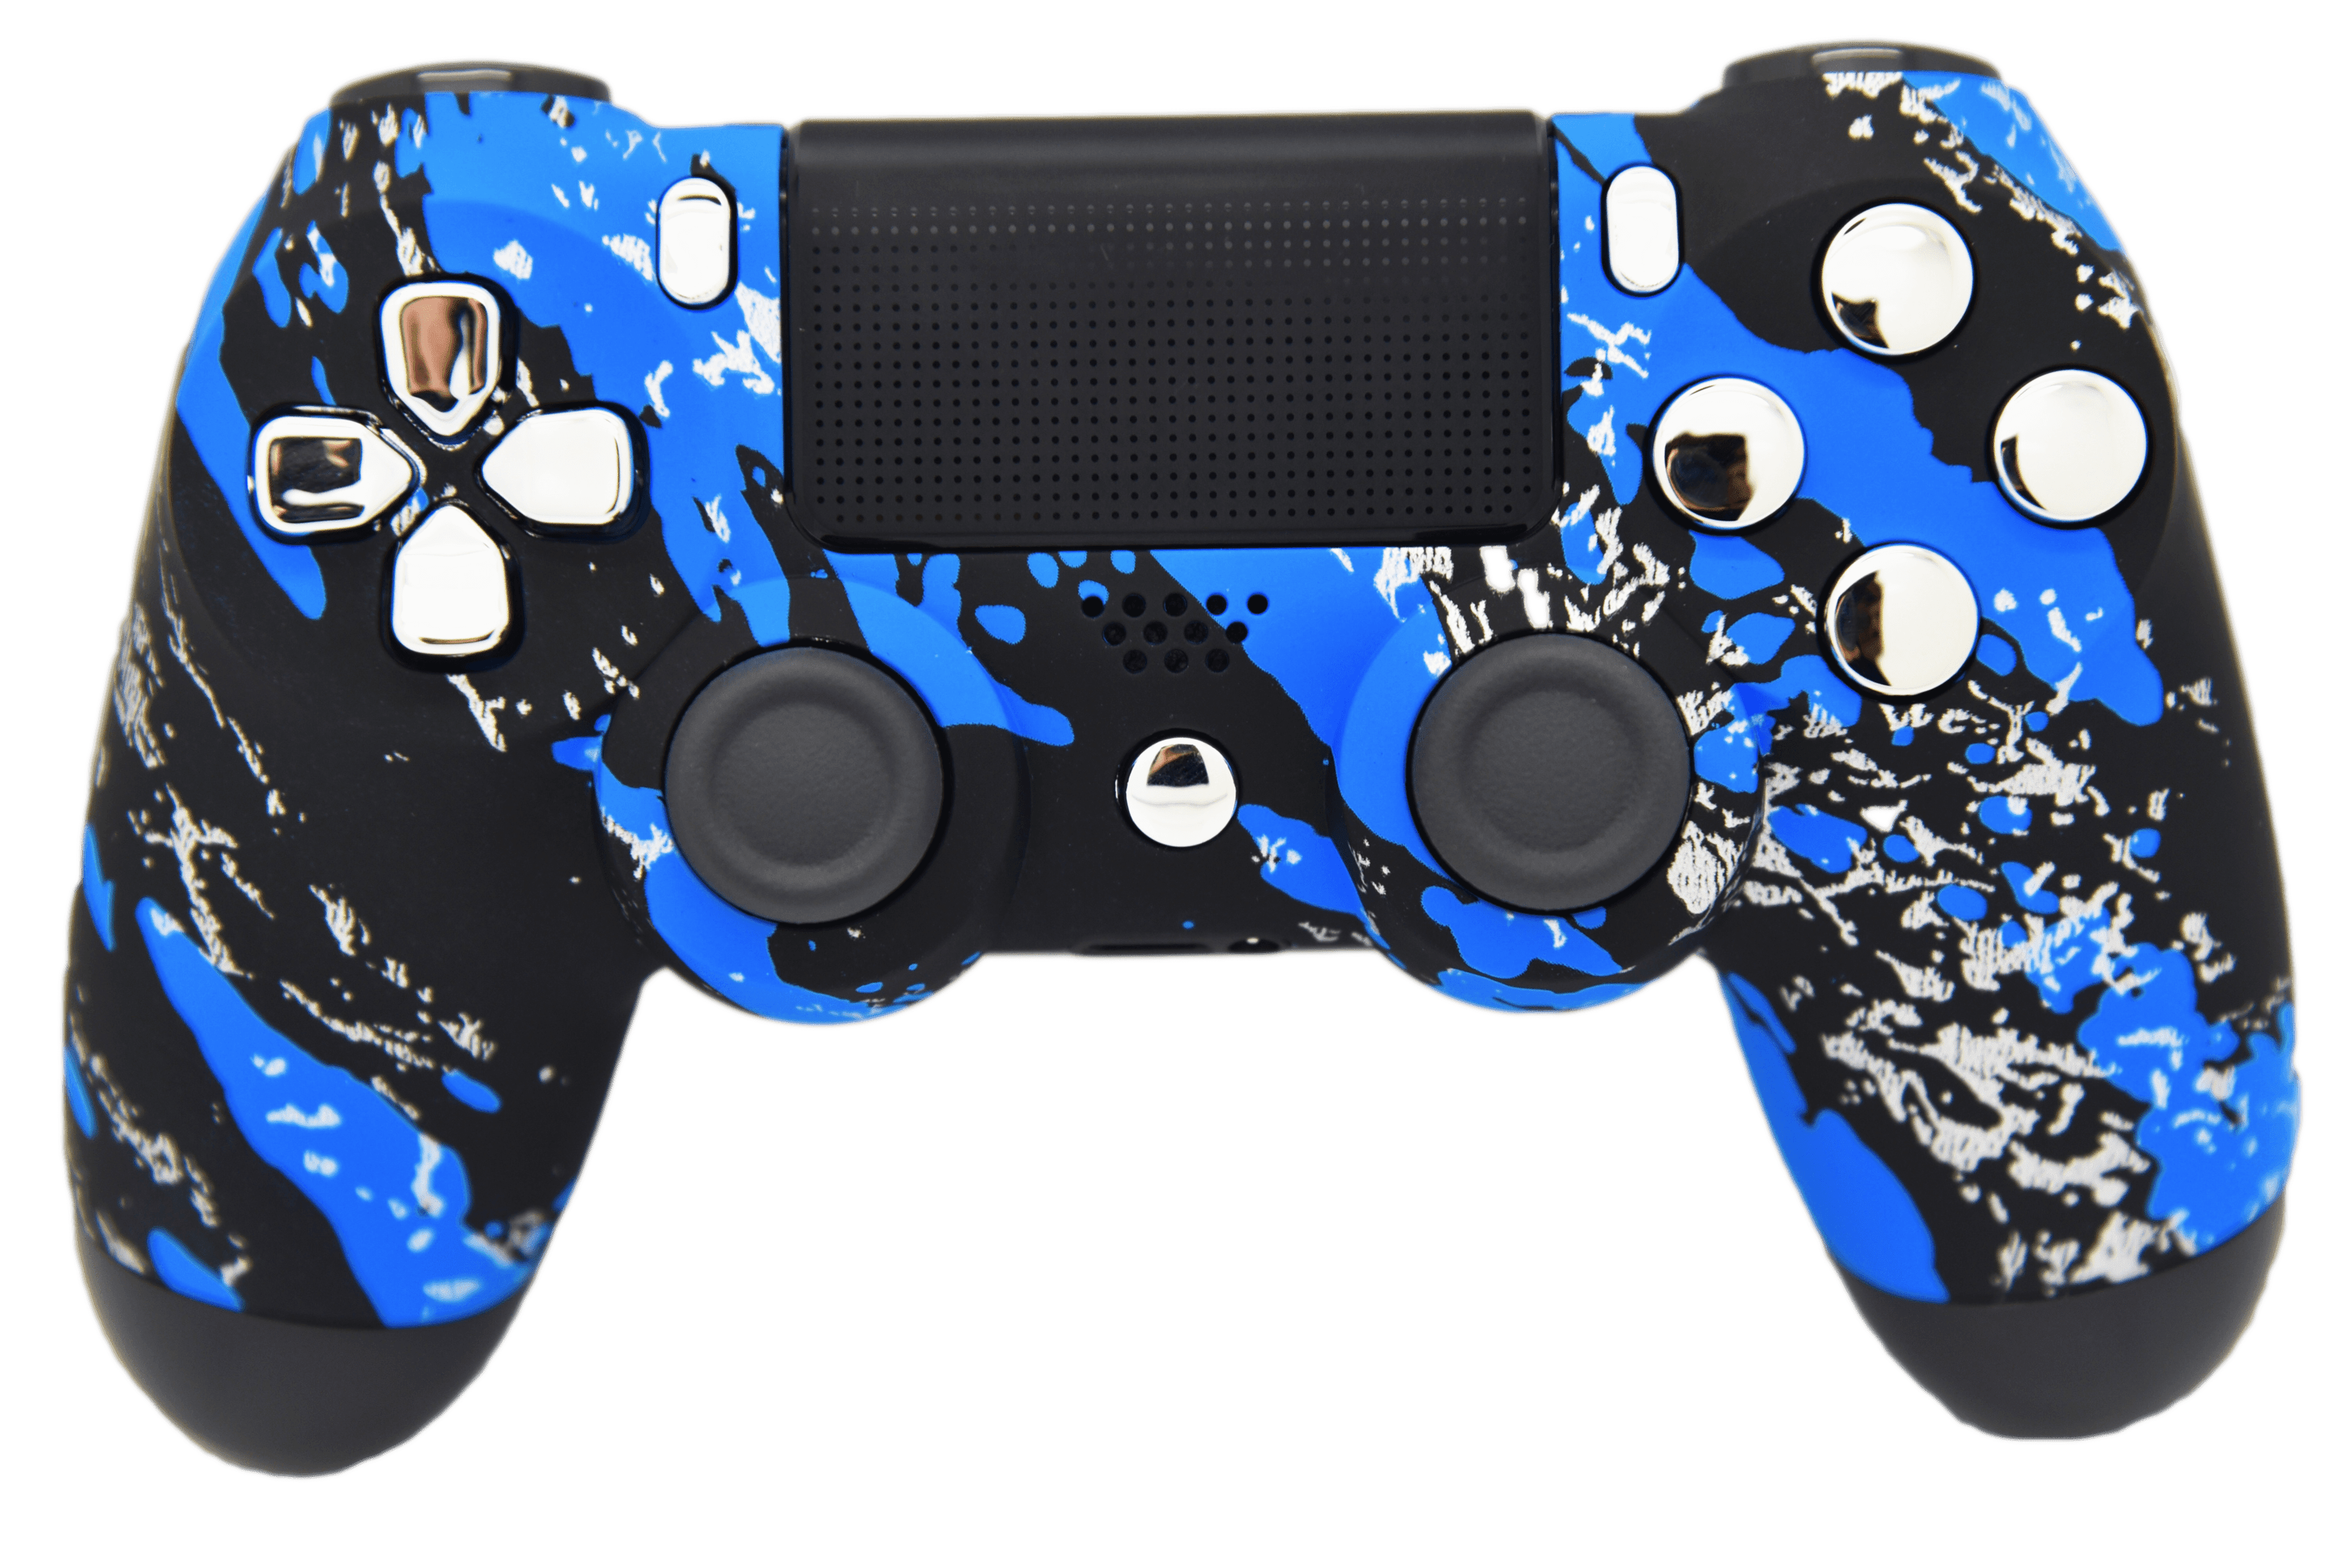 Ps4 mod. Sony PLAYSTATION 4 Controller PNG. Джойстик ps4 Рапид. Dualshock 4 Cod. PLAYSTATION 4 Joystick PNG.